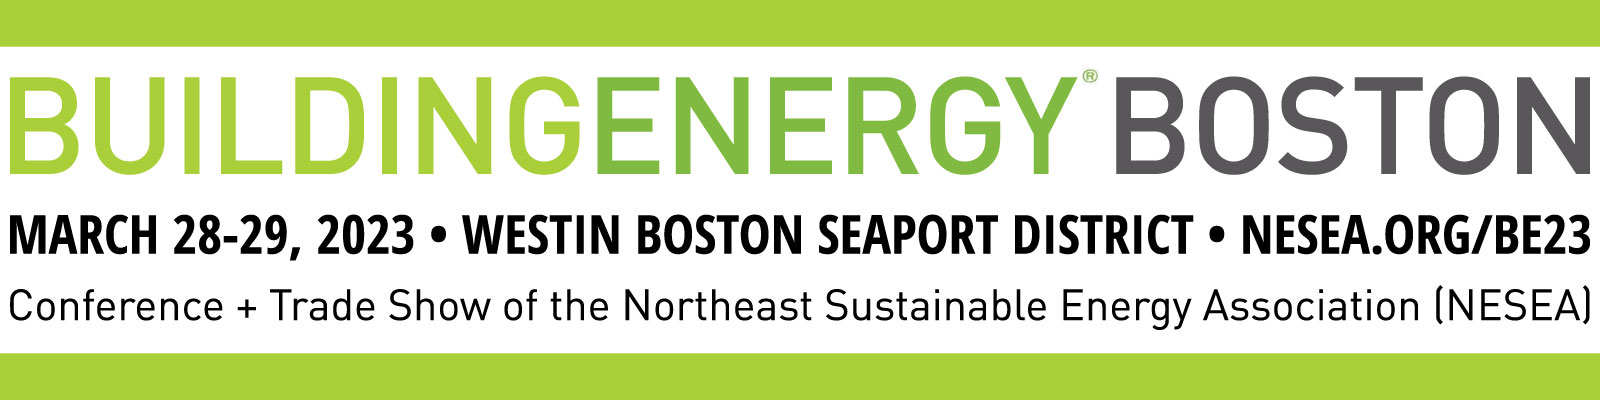 BuildingEnergy Boston, March 28-29, 2023, Westin Boston Seaport District, NESEA.org/BE23, Conference and Trade Show of the Northeast Sustainable Energy Association (NESEA).